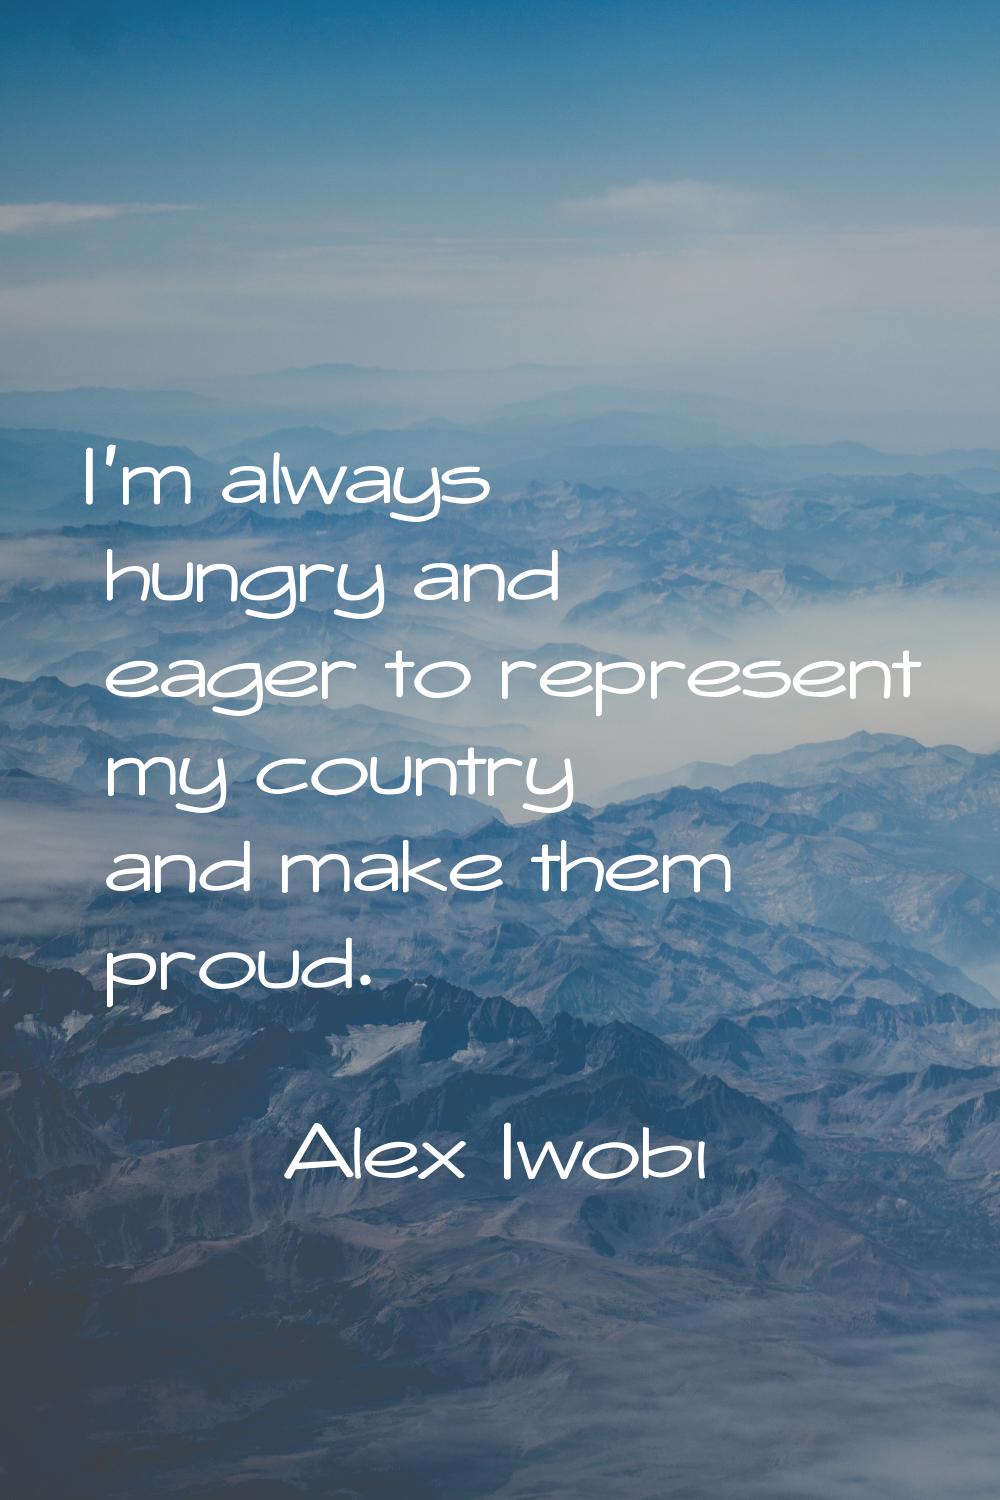 I'm always hungry and eager to represent my country and make them proud.